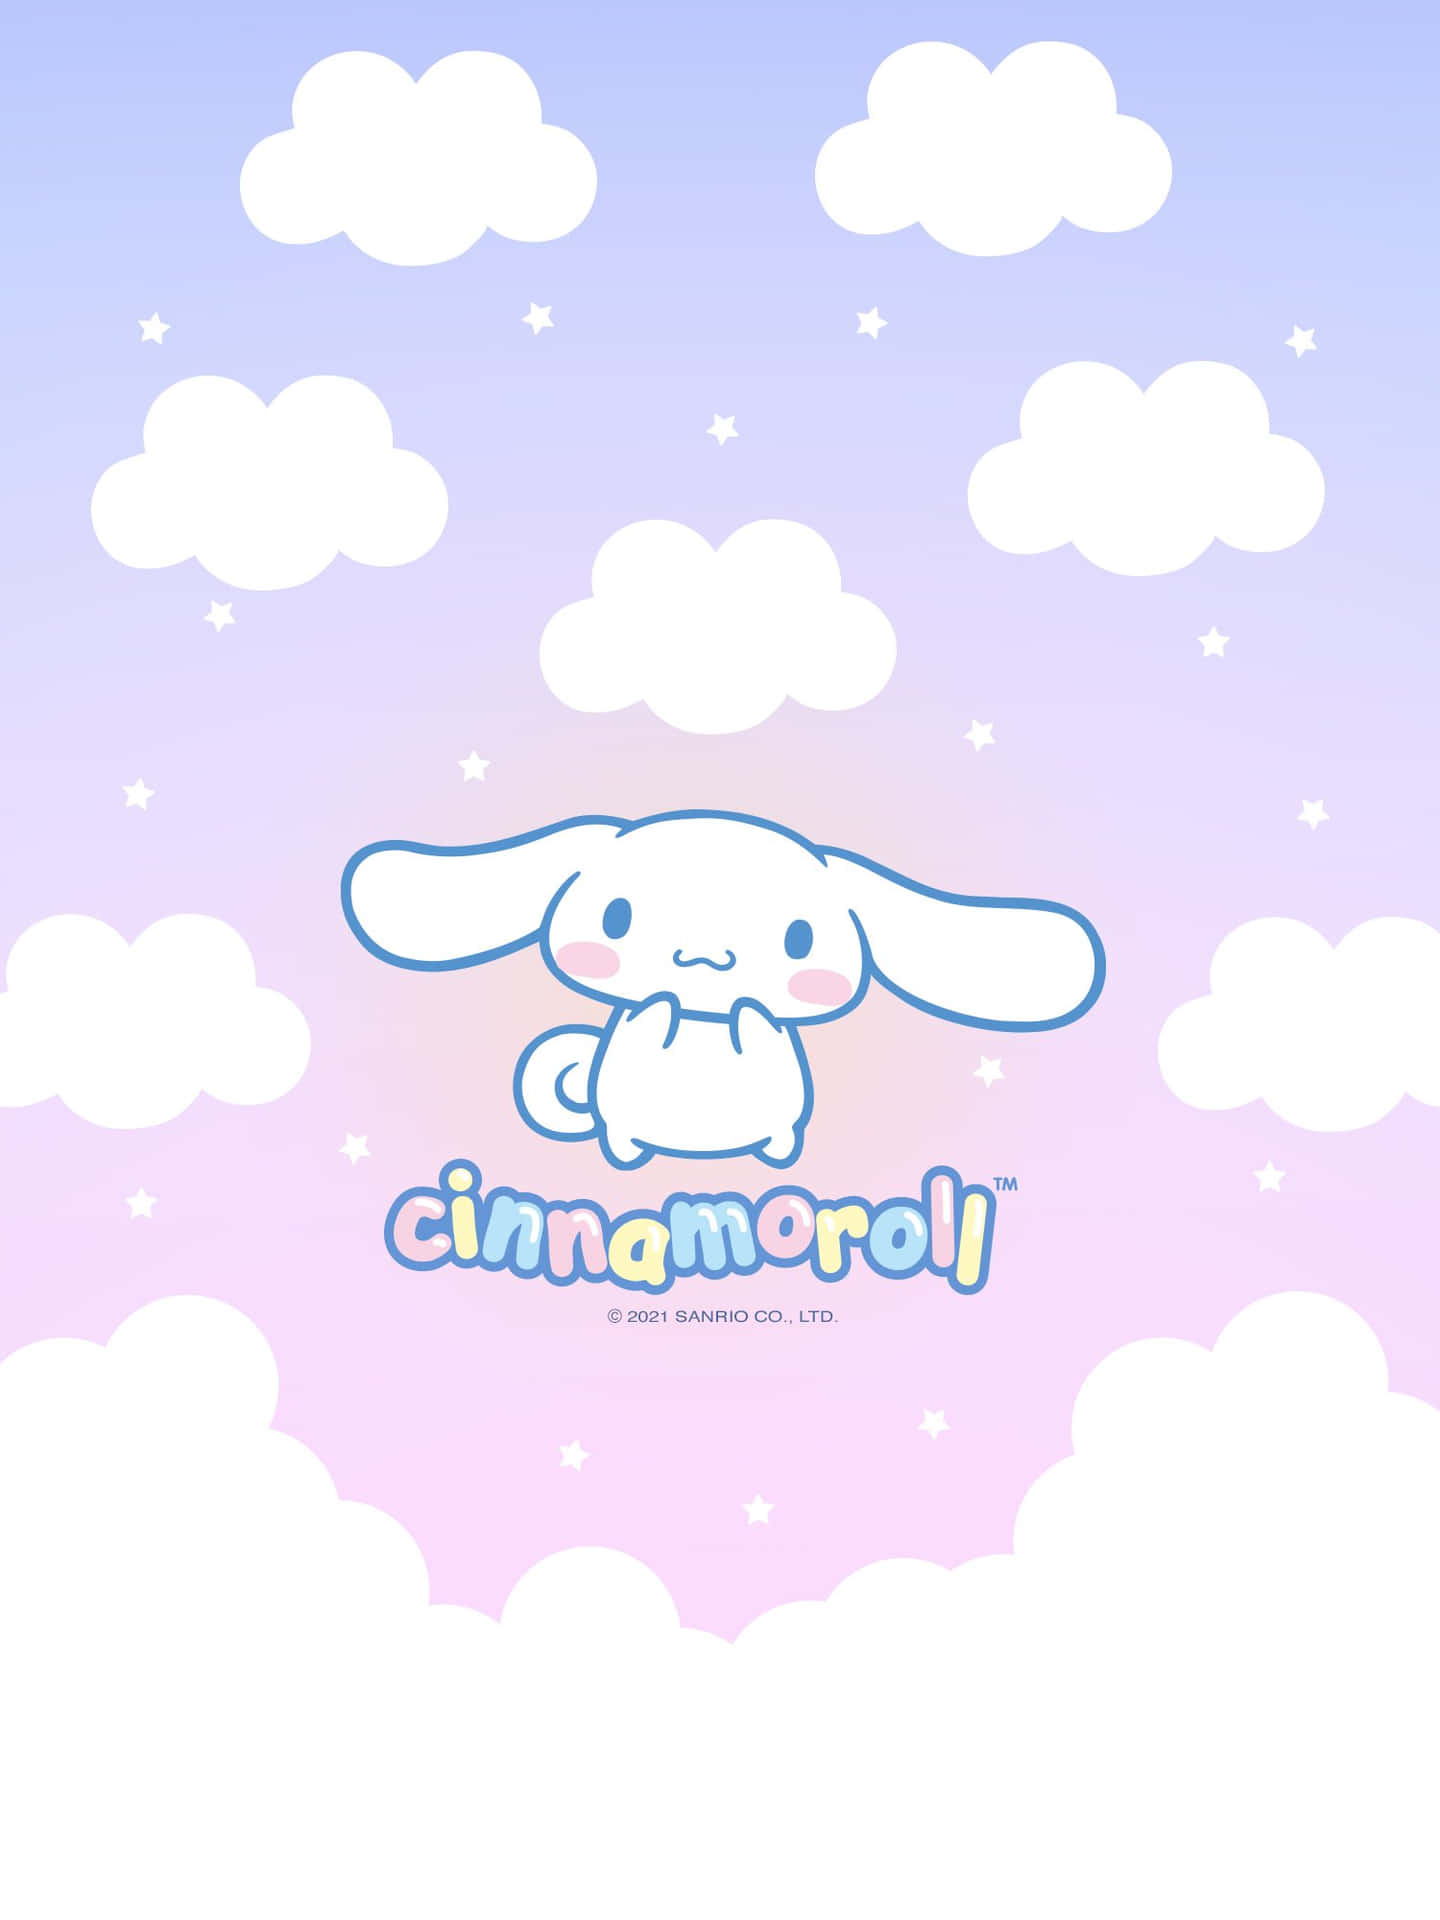 Get ready with your favorite Sanrio buddy Wallpaper